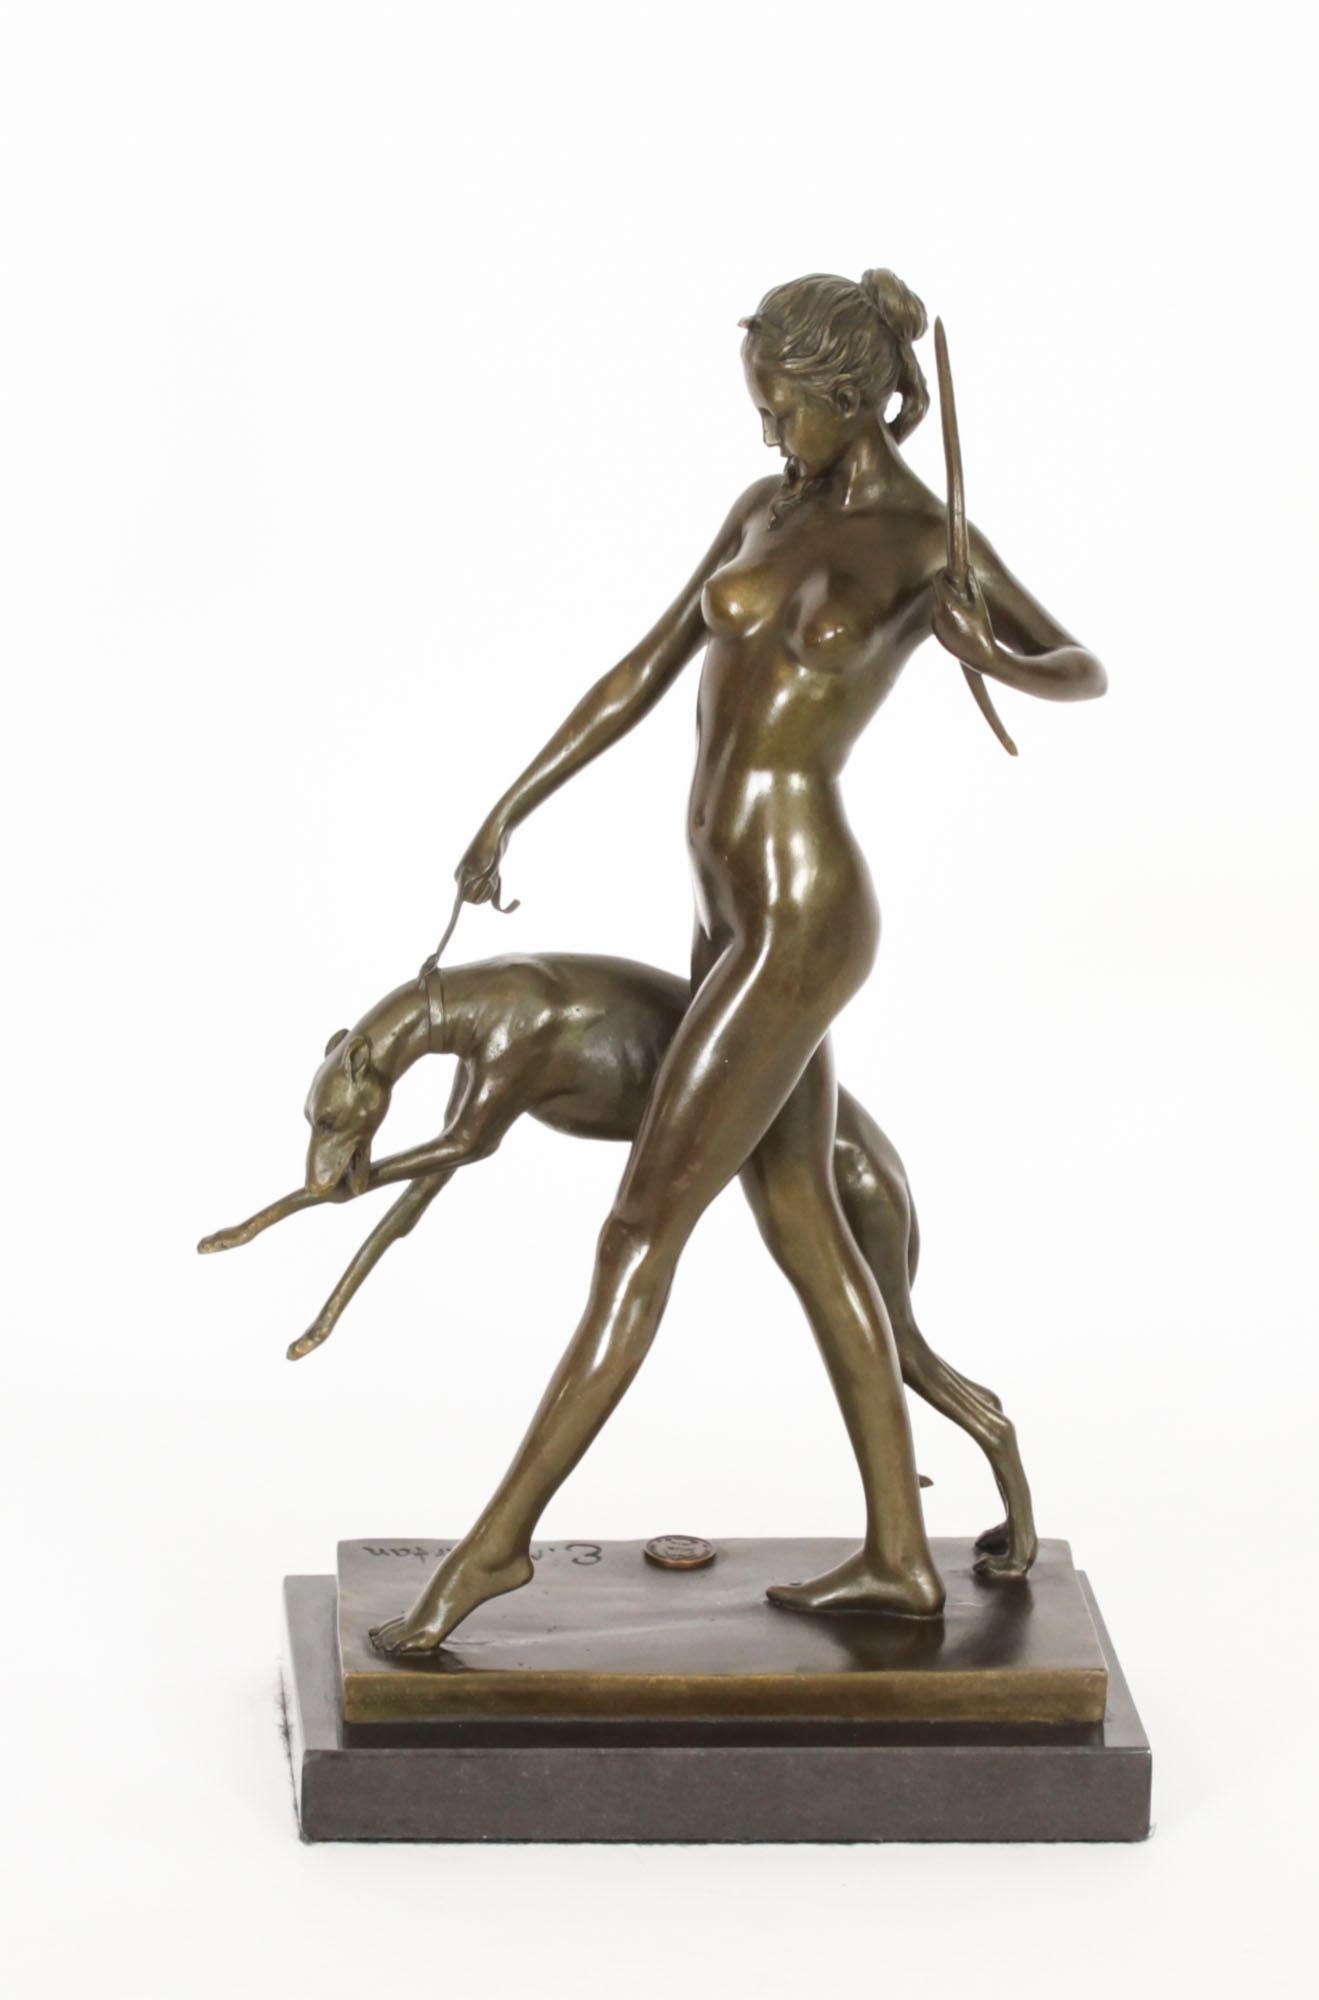 A beautiful Art Deco sculpture of Diana the Huntress with Hound by Edward Francis McCartan (1879-1947) signed by the sculptor and also bearing the stamp of the foundry, Garante de Bronze, Paris, circa 1930 in date.

The sculpture of dark brown